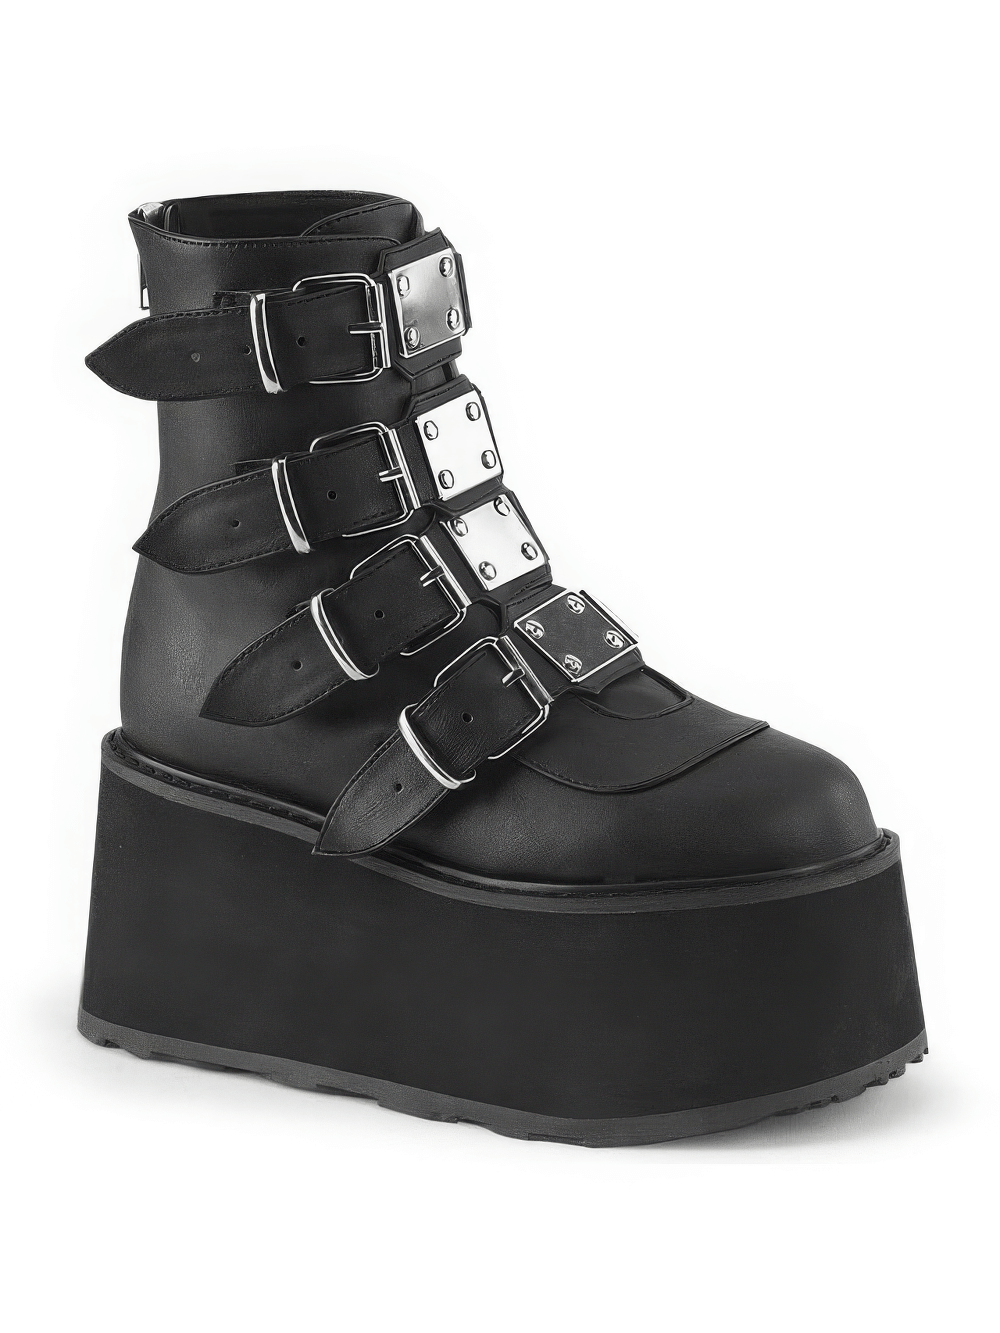 DEMONIA Chunky Platform Ankle Boots with Back Zip Closure